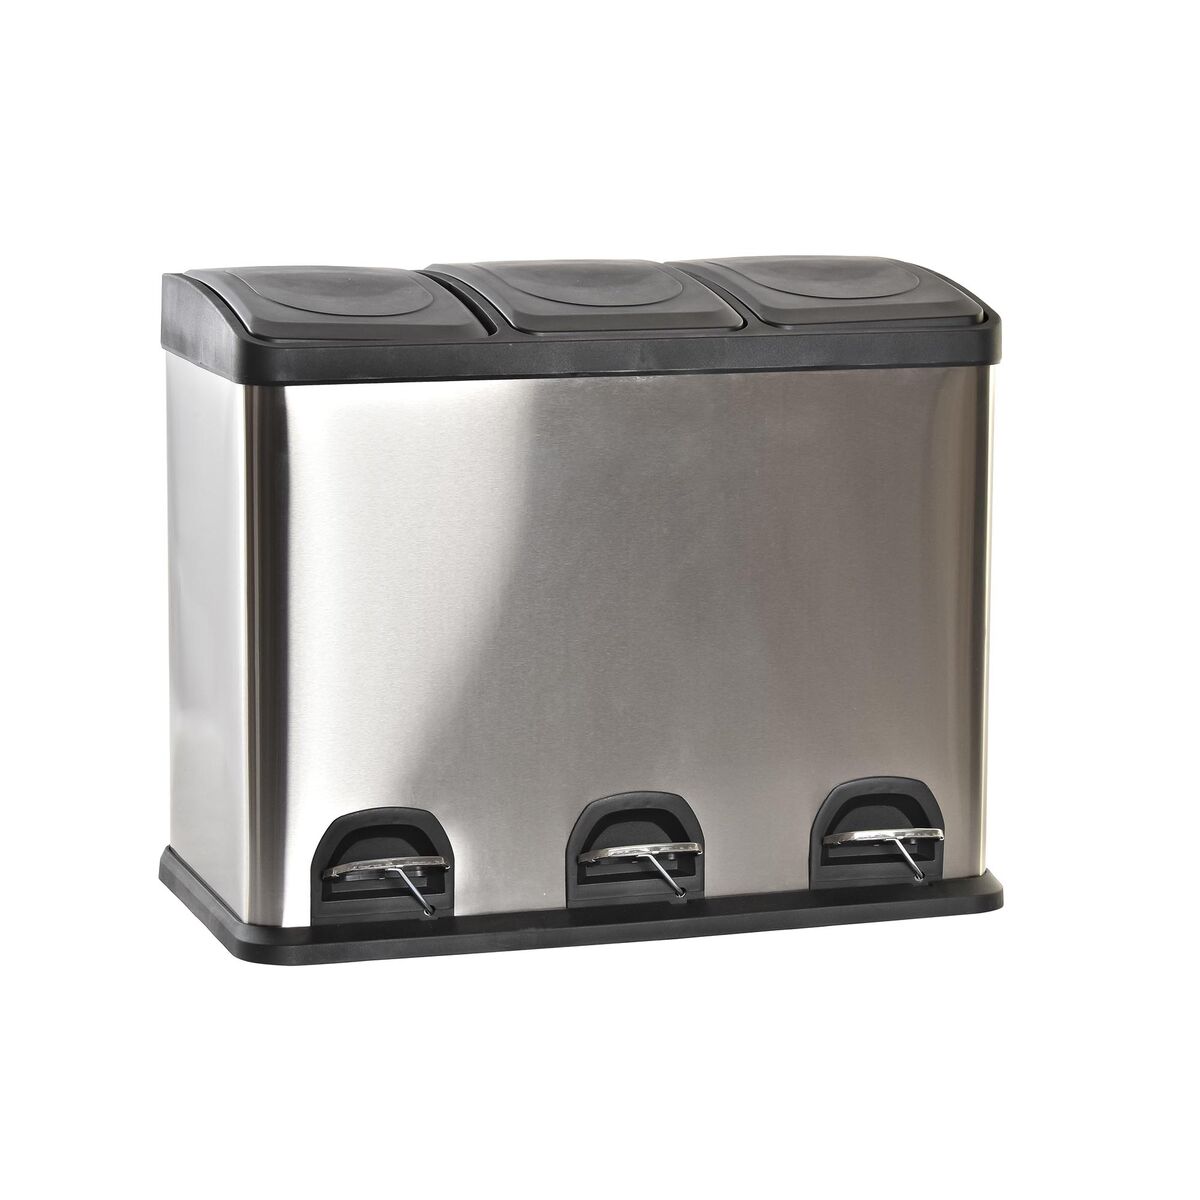 Recycling Waste Bin DKD Home Decor Silver Black Stainless steel Basic (59 x 33 x 48 cm) (45 L)